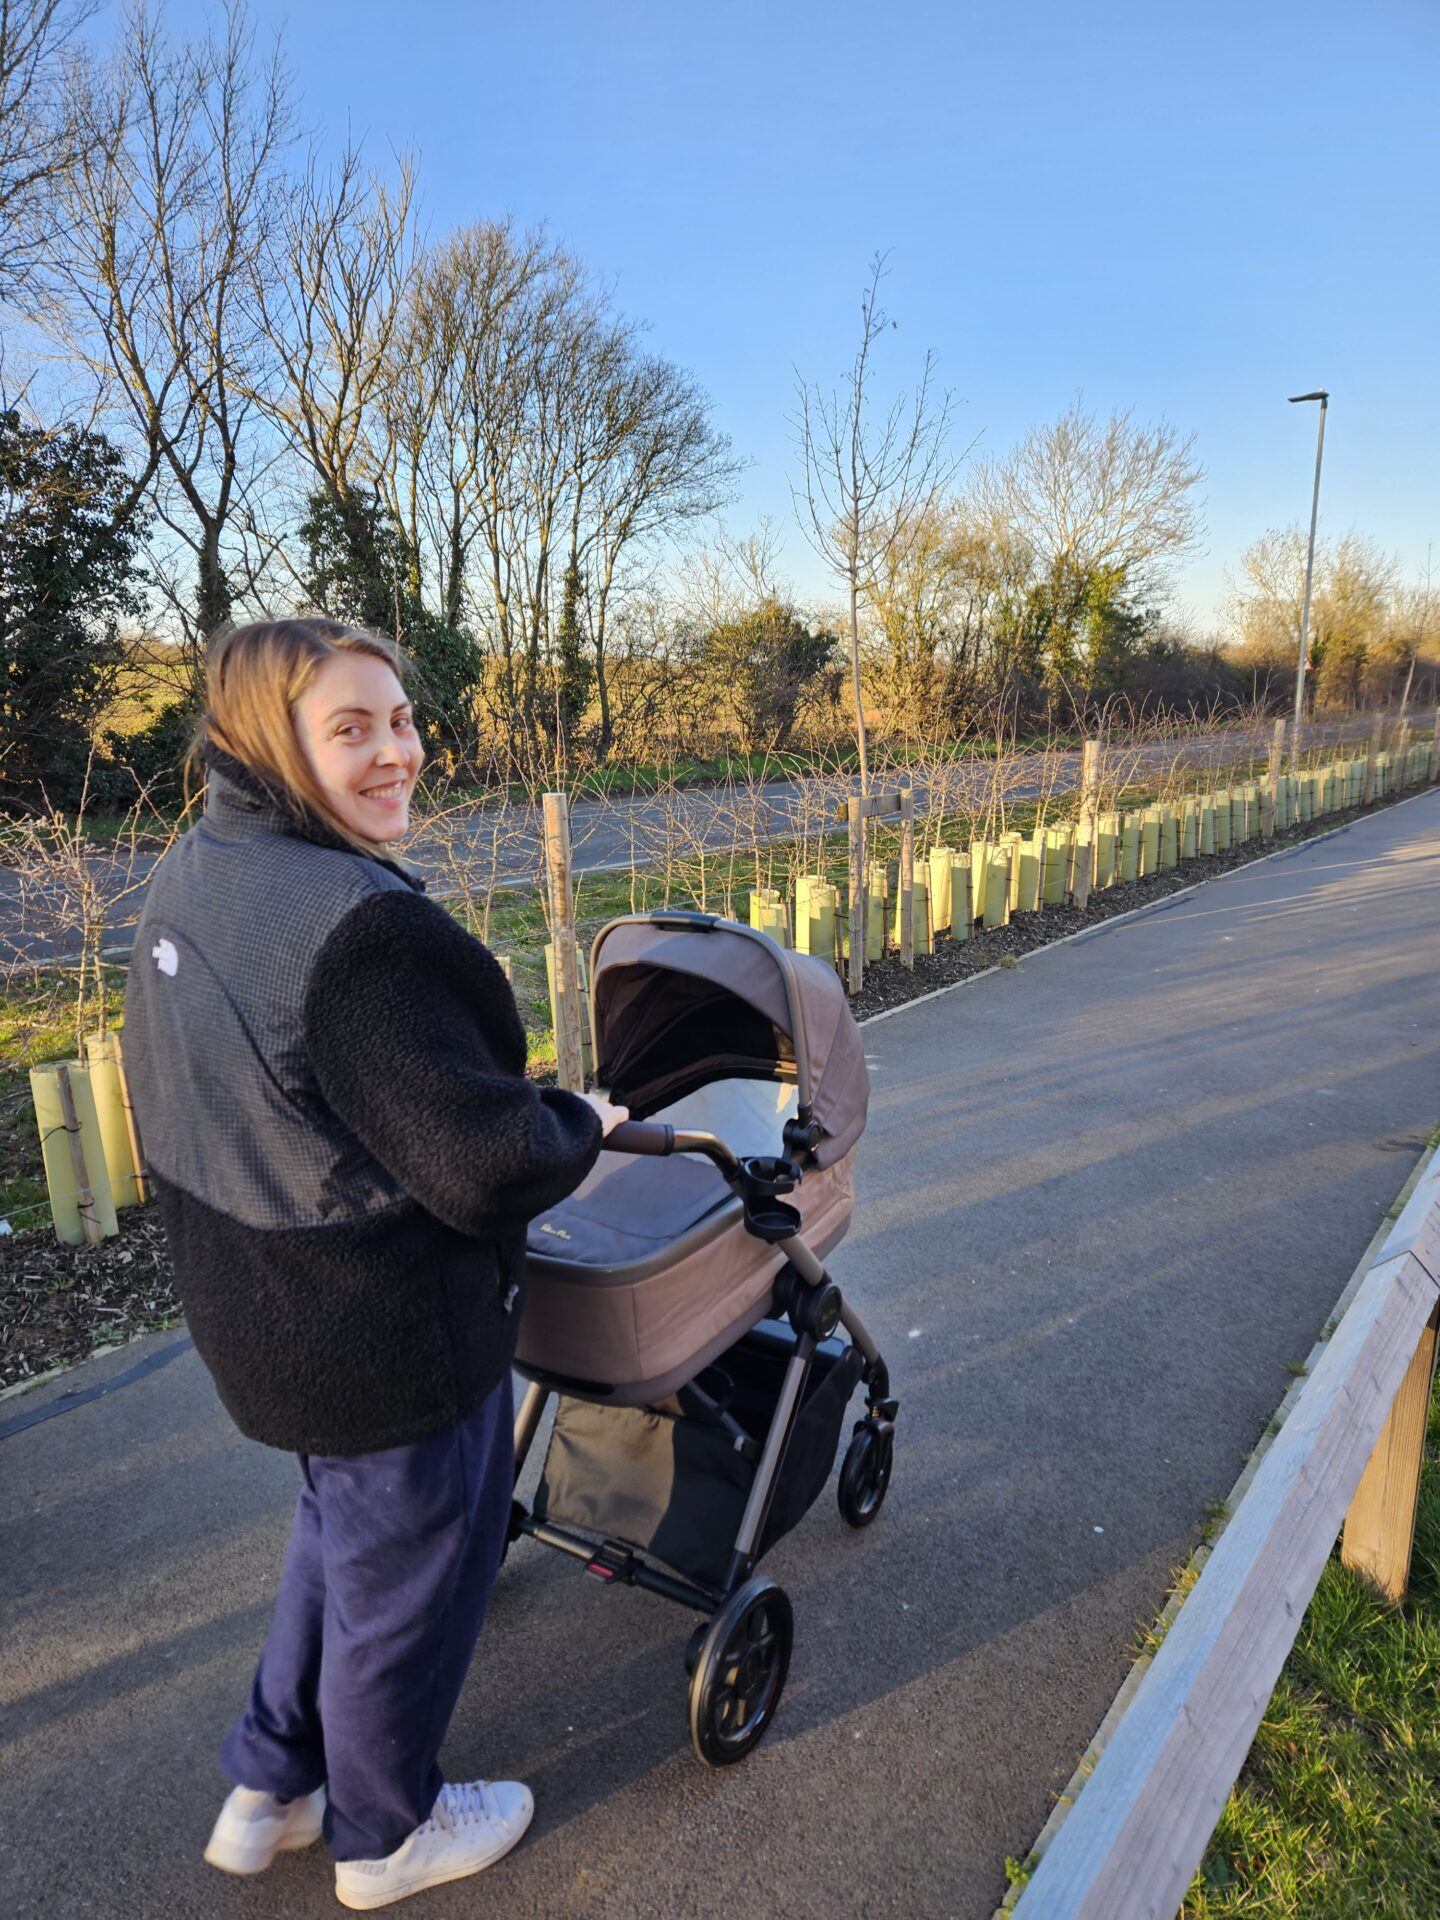 Woman wearing a black fleece and blue jogging bottoms is pushing a pram along a pavement lined with trees. Her head is turned back to look at the camera and she is smiling. 